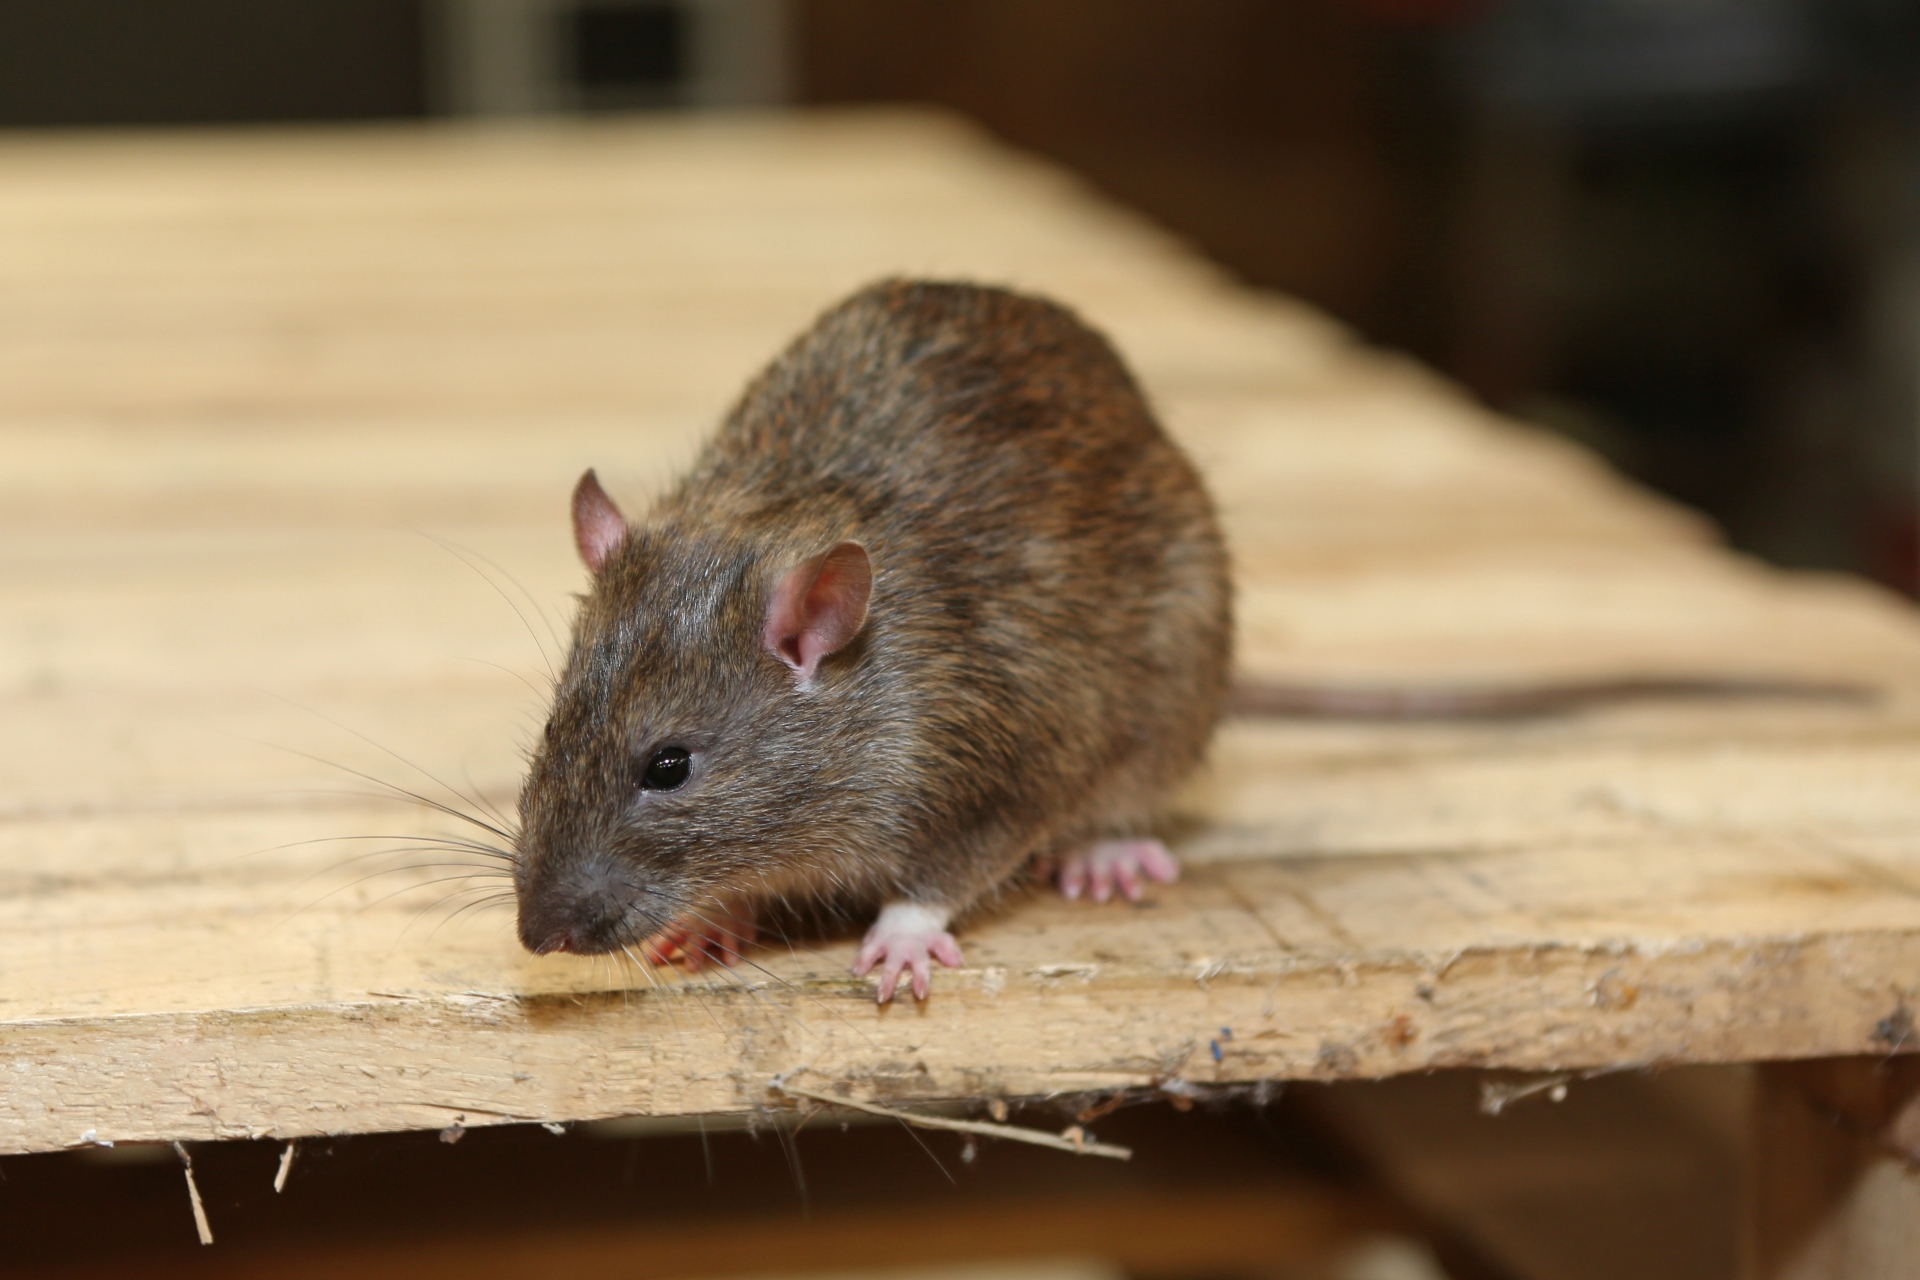 Rat Control, Pest Control in Olympic Park, E20. Call Now 020 8166 9746